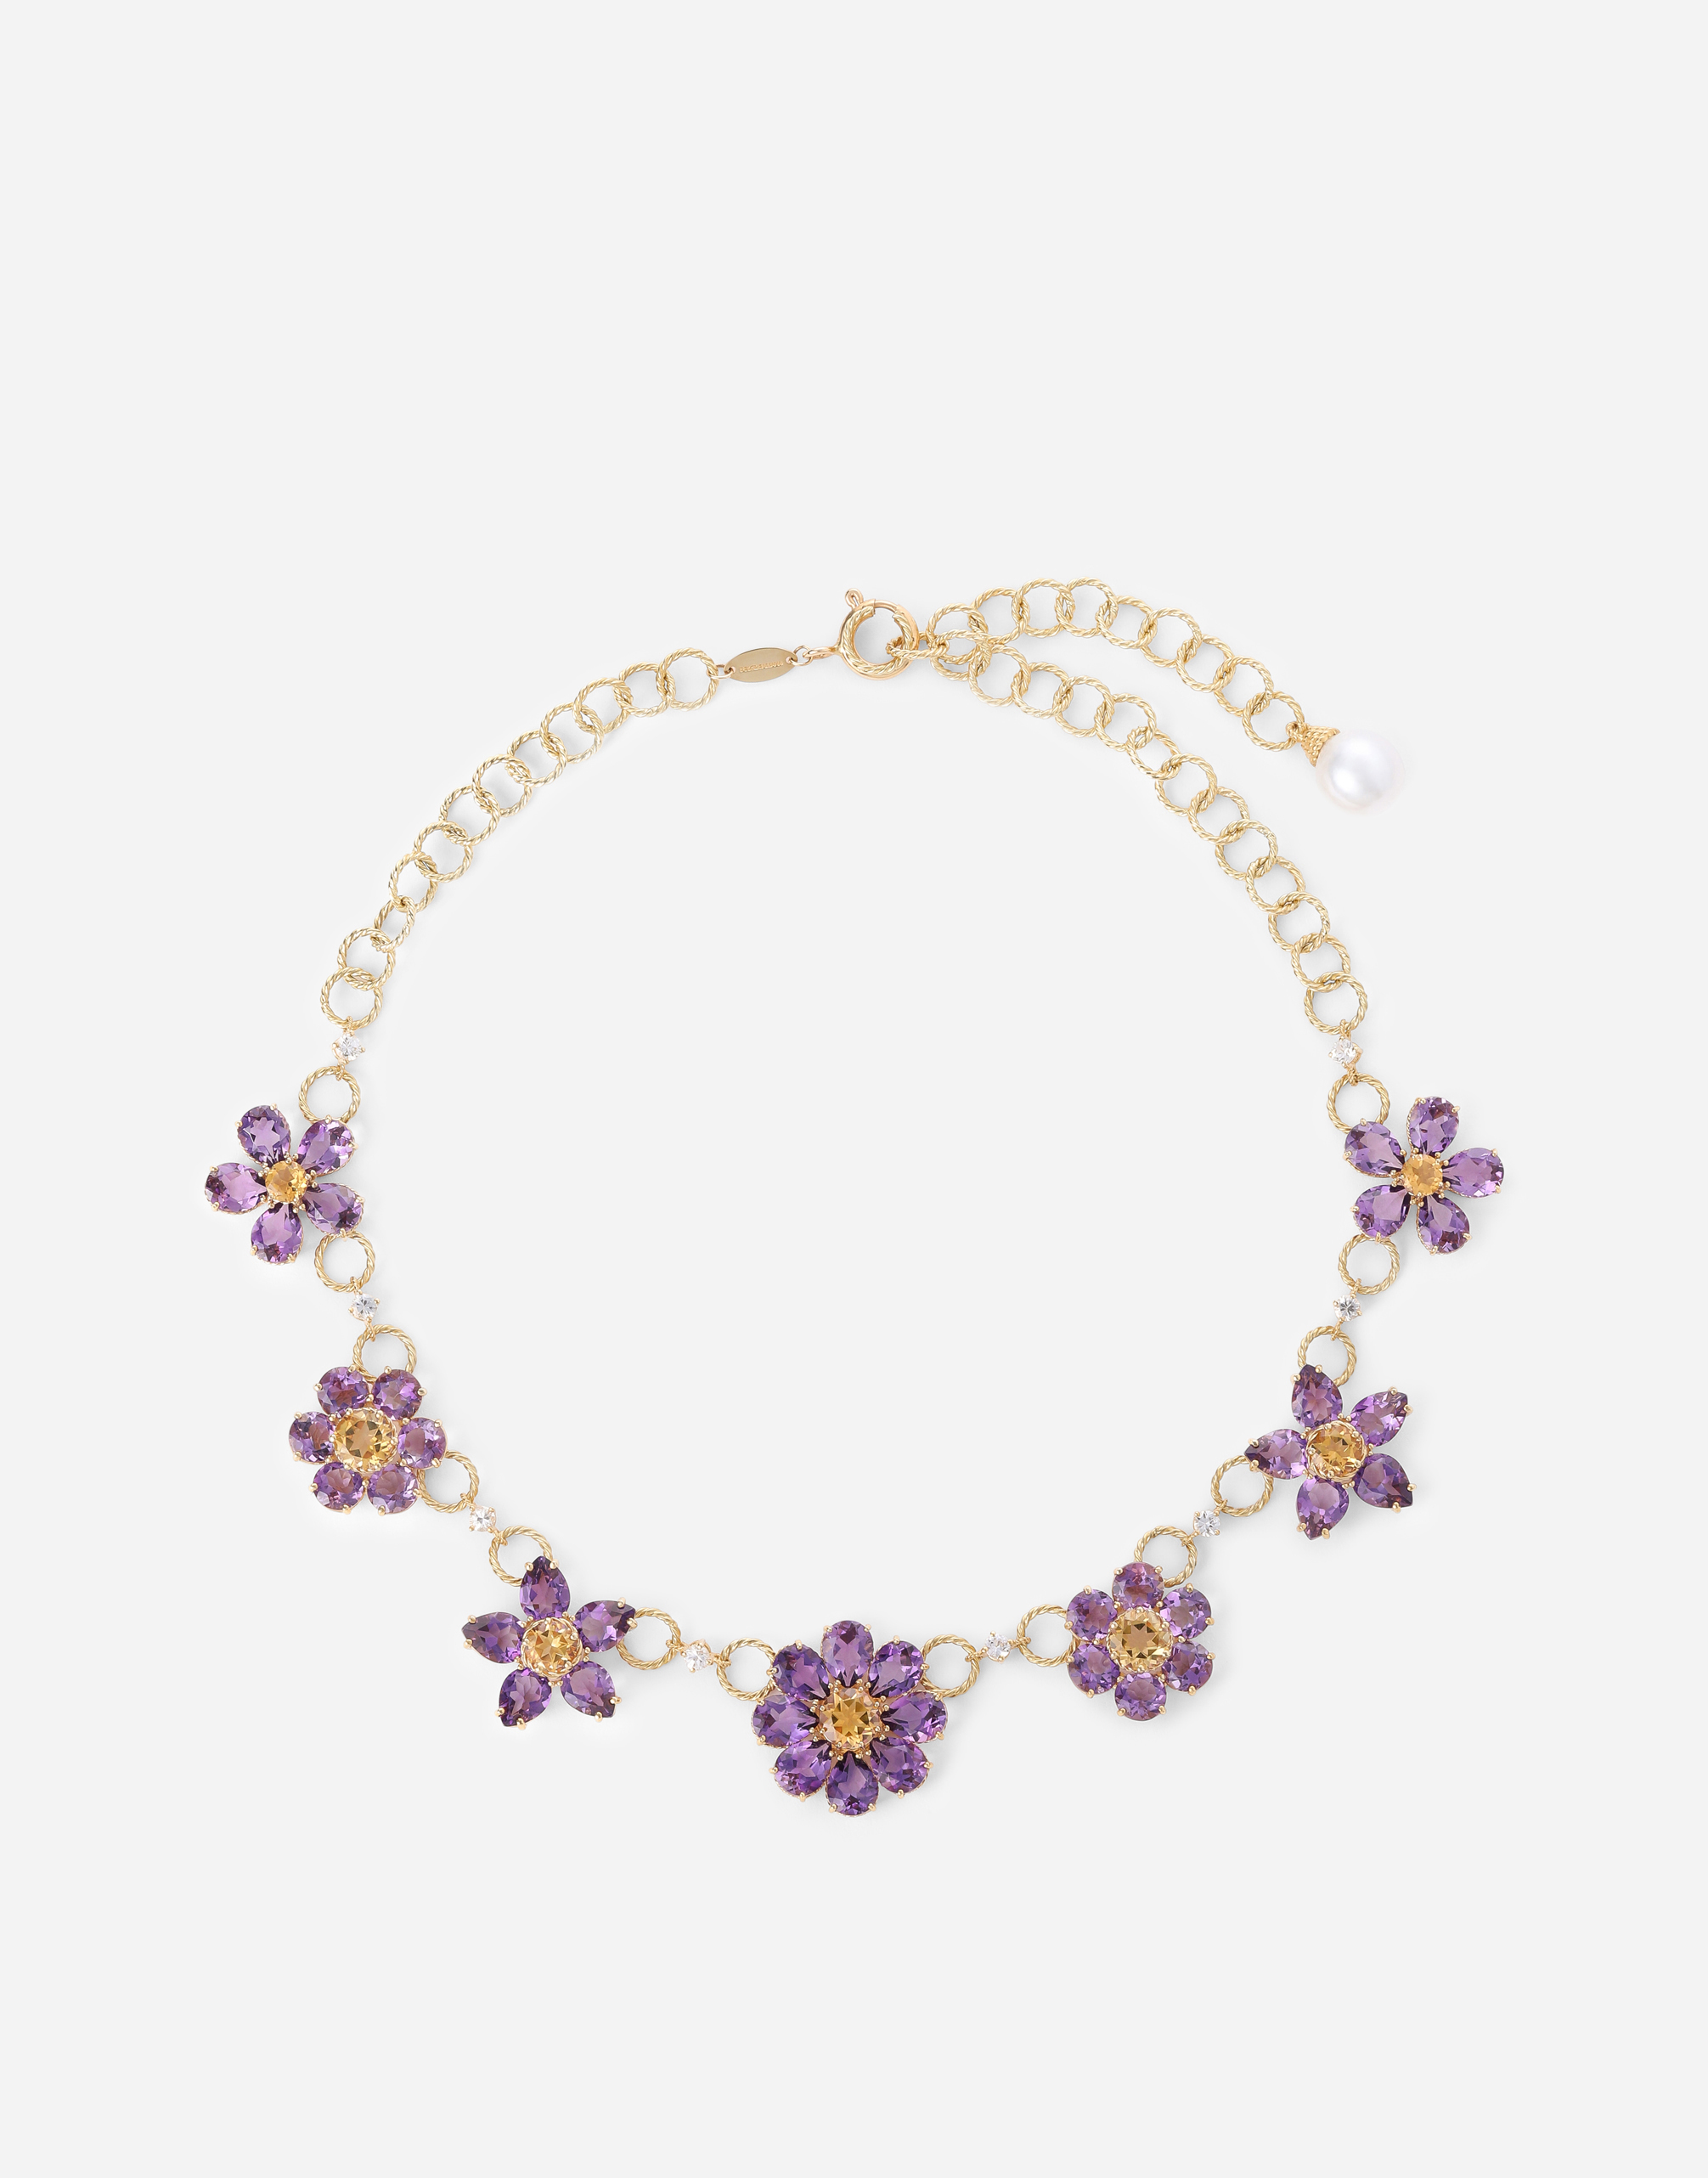 Dolce & Gabbana Spring Necklace In Yellow 18kt Gold With Amethyst Floral Motif Gold Female Onesize